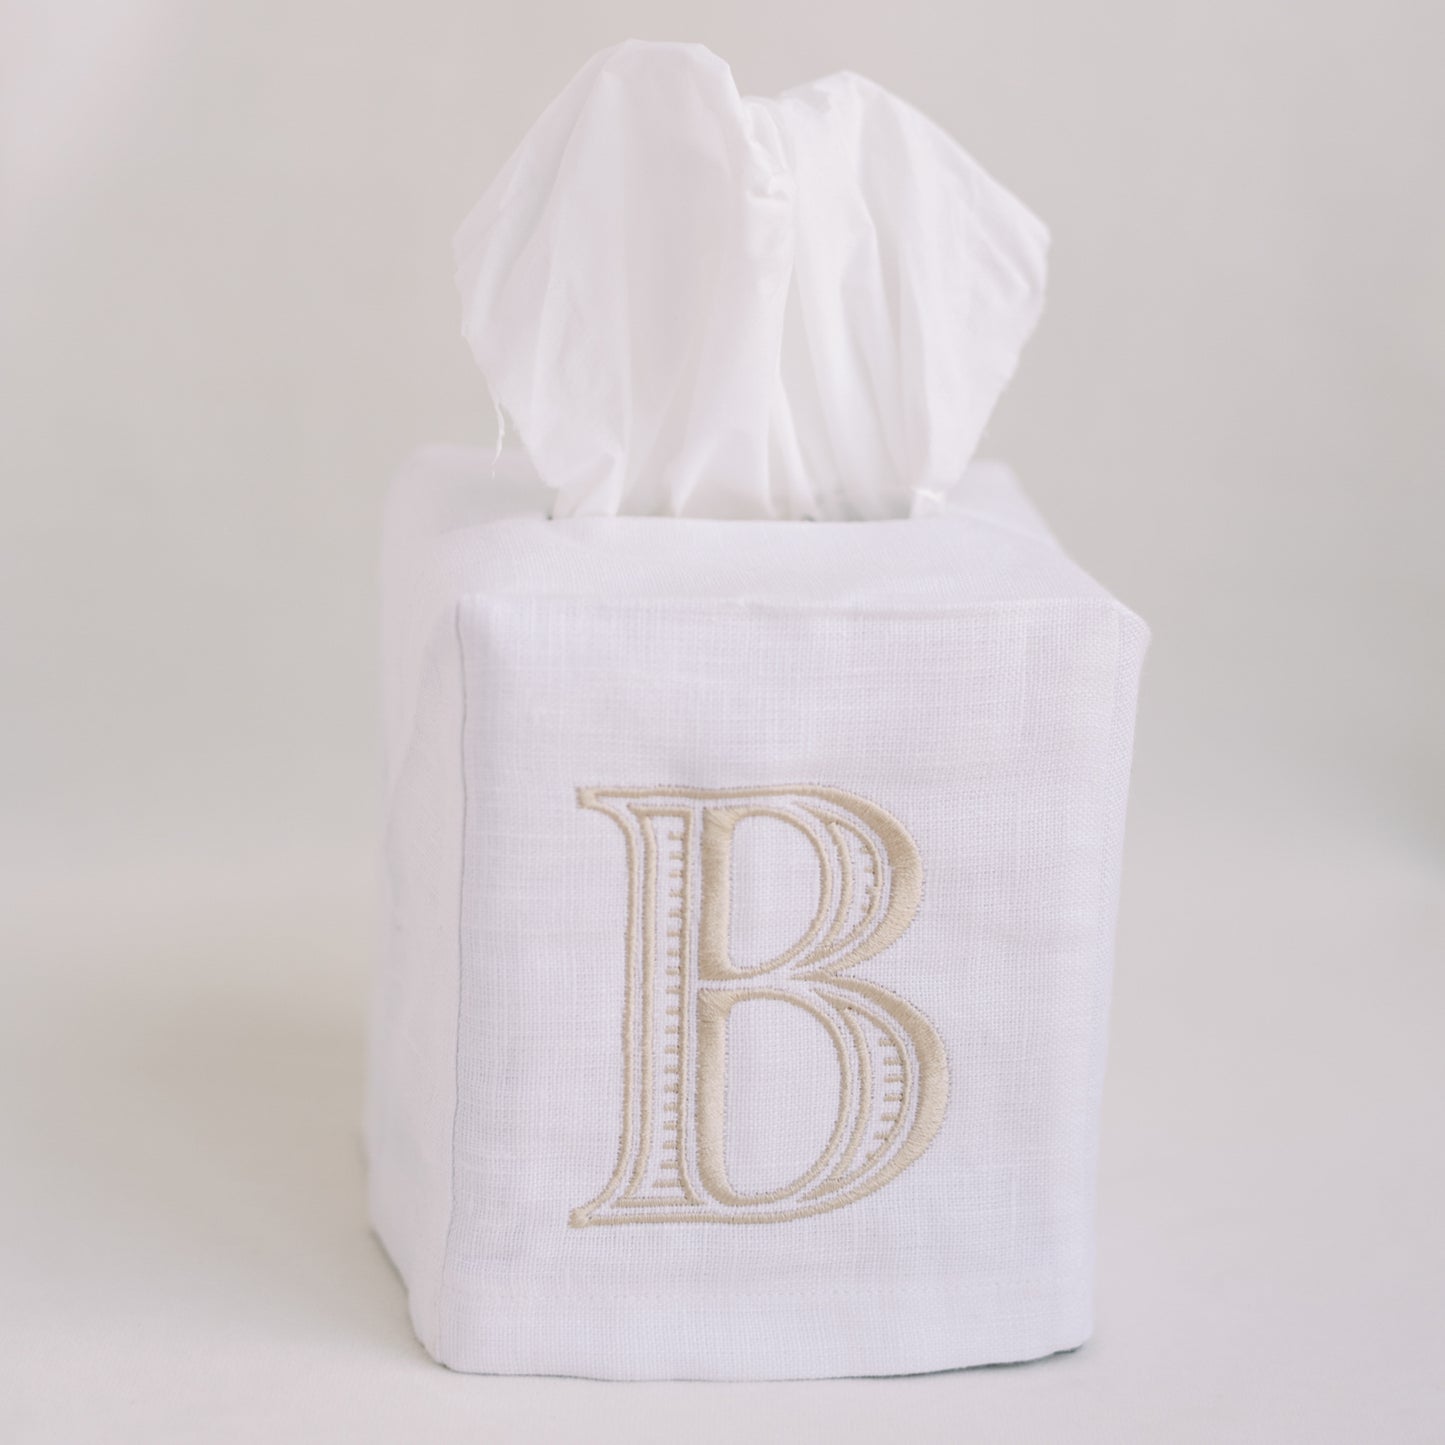 Embroidered Tissue Box Cover with Single Letter Formal Monogram